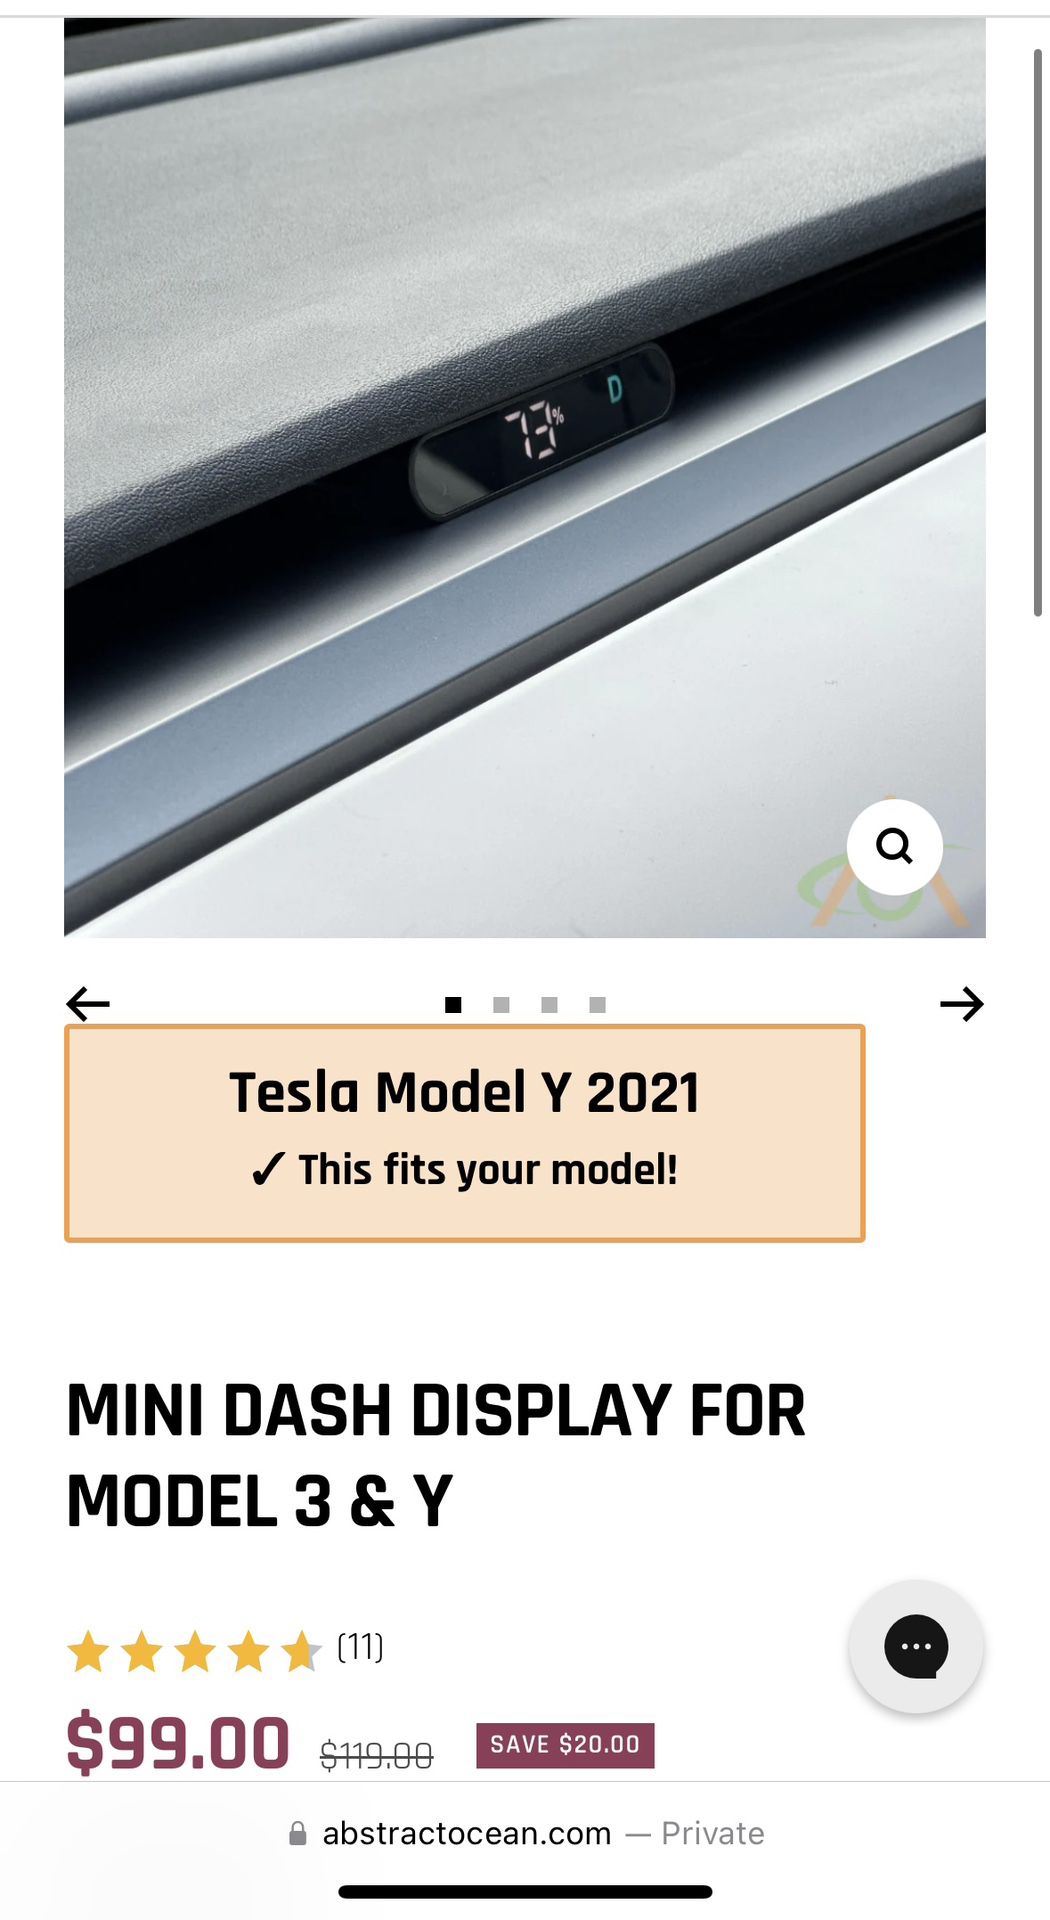 Abstract ocean Mini Dash Display for Tesla Model Y/3 for Sale in Santa Ana,  CA - OfferUp